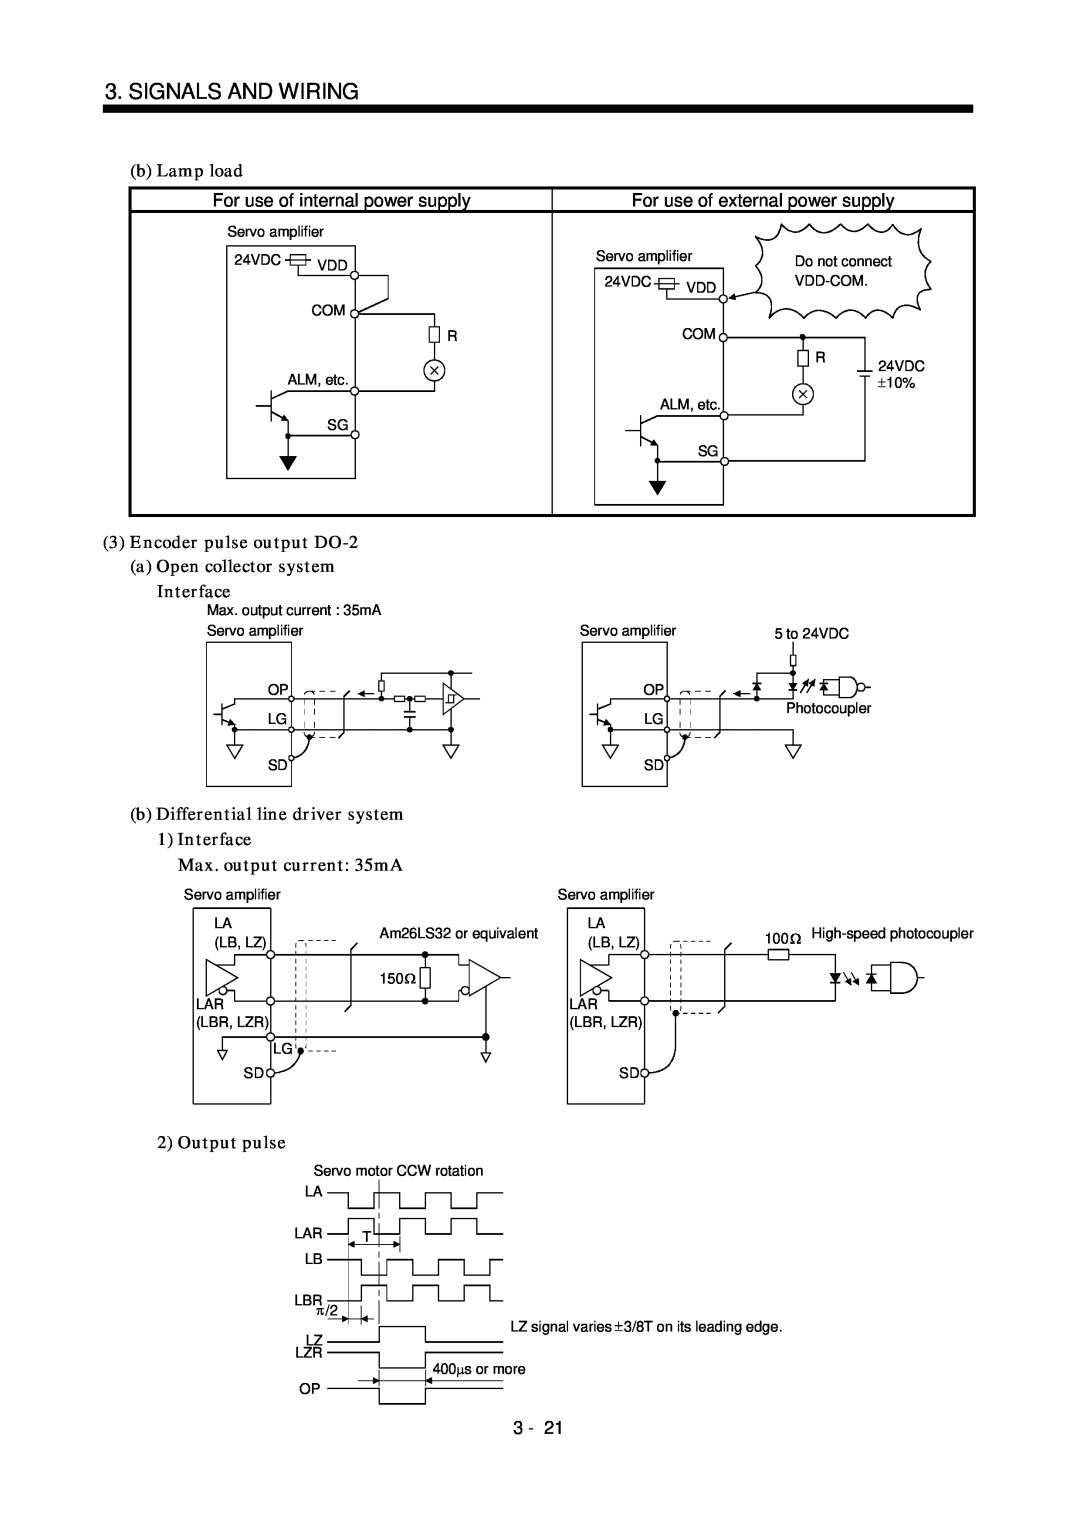 Mitsubishi Electronics MR-J2S- CL Signals And Wiring, b Lamp load, For use of internal power supply, Output pulse 